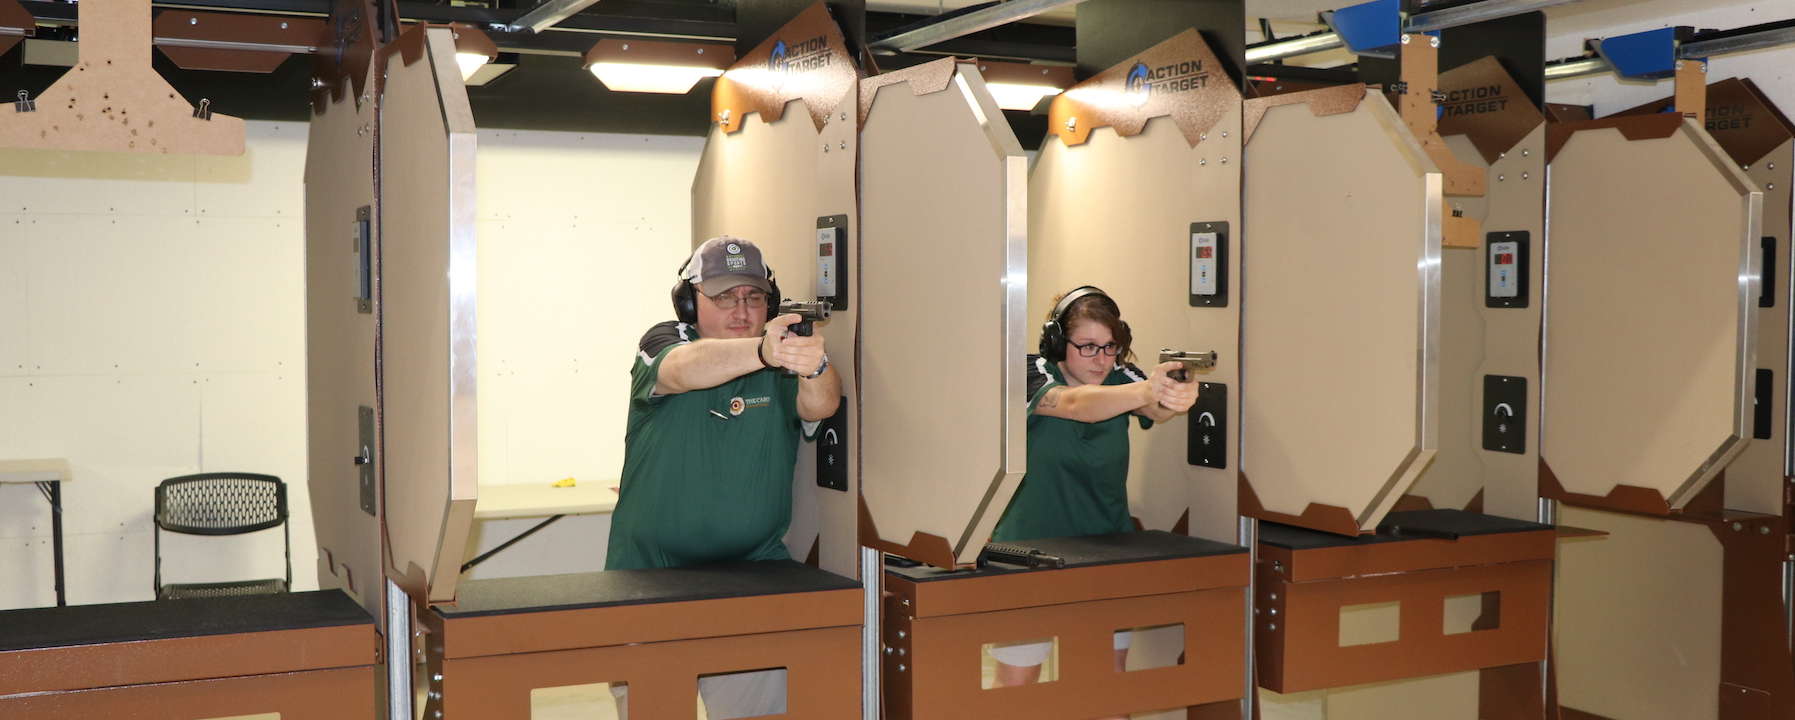 The Cabin's Indoor Shooting Range – The Cabin Armory & Training